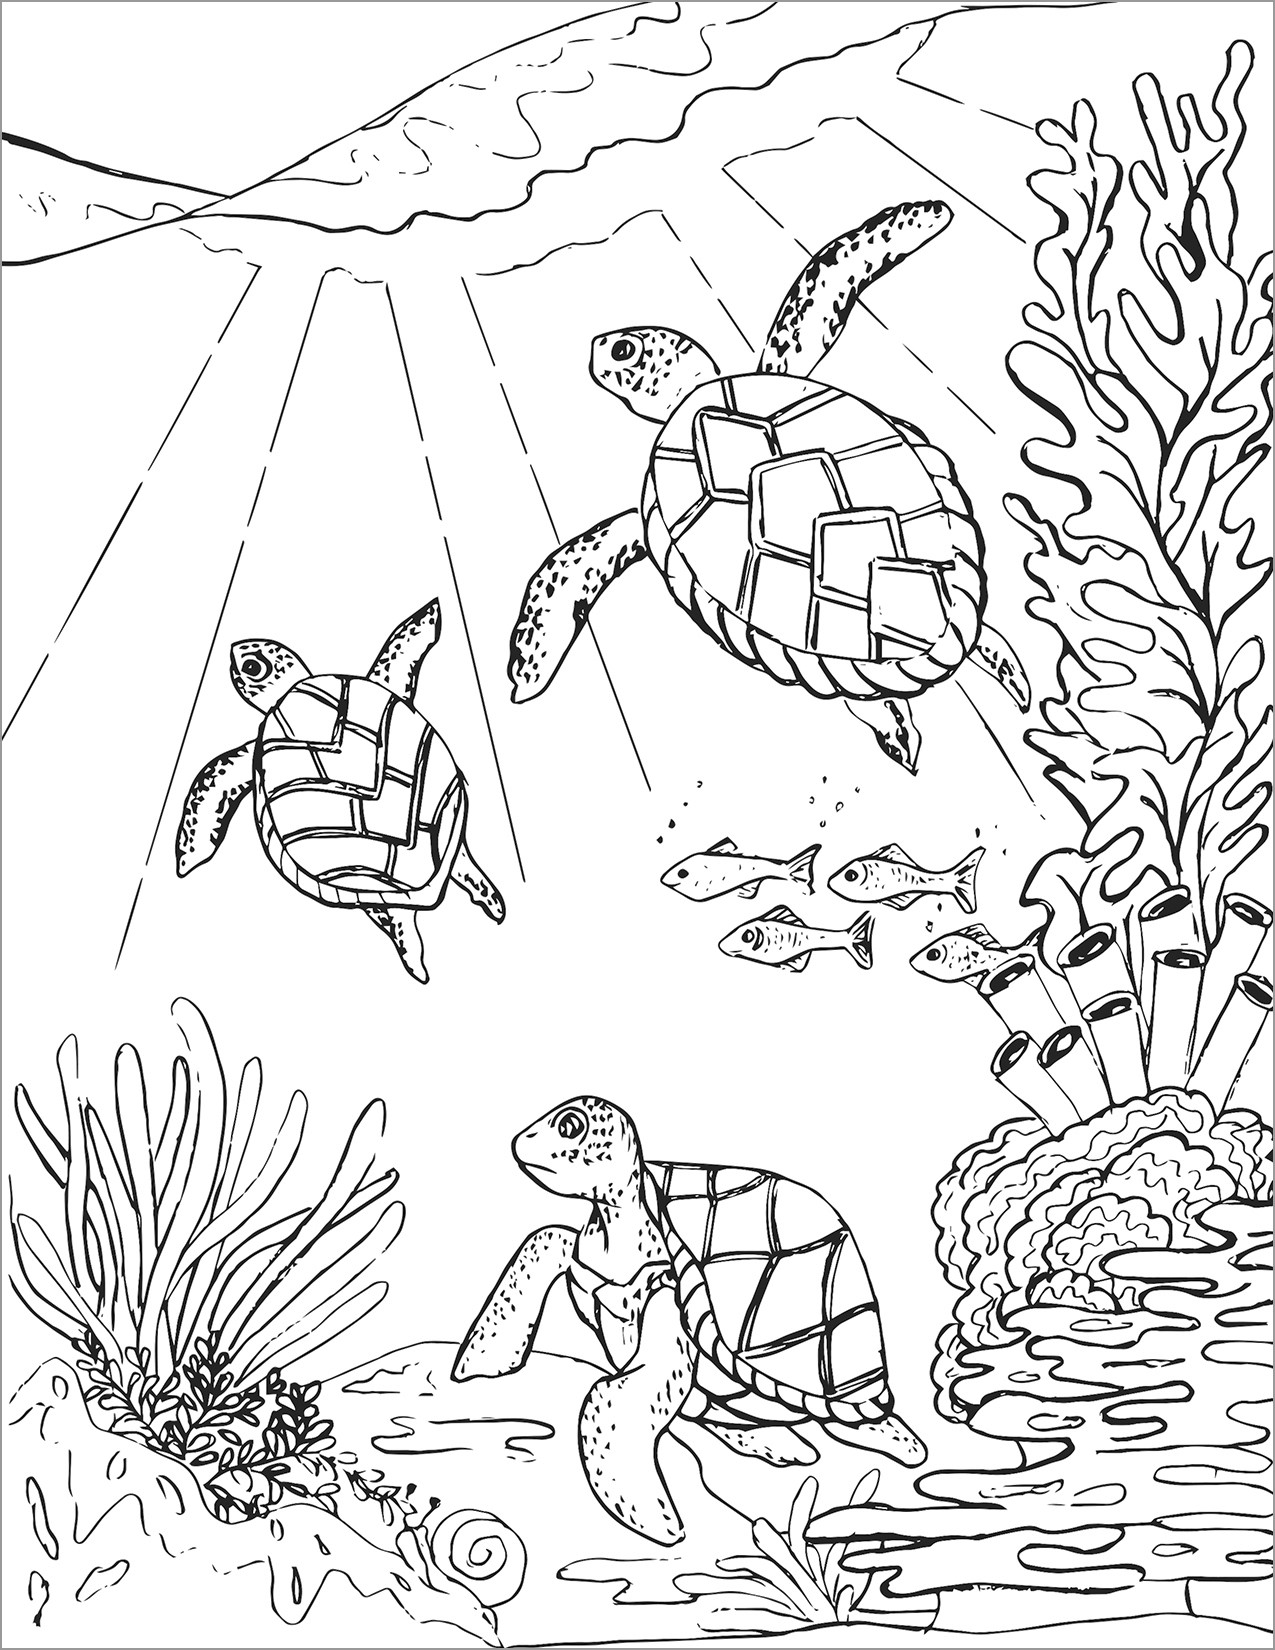 Three tortoise Coloring Page for Adult